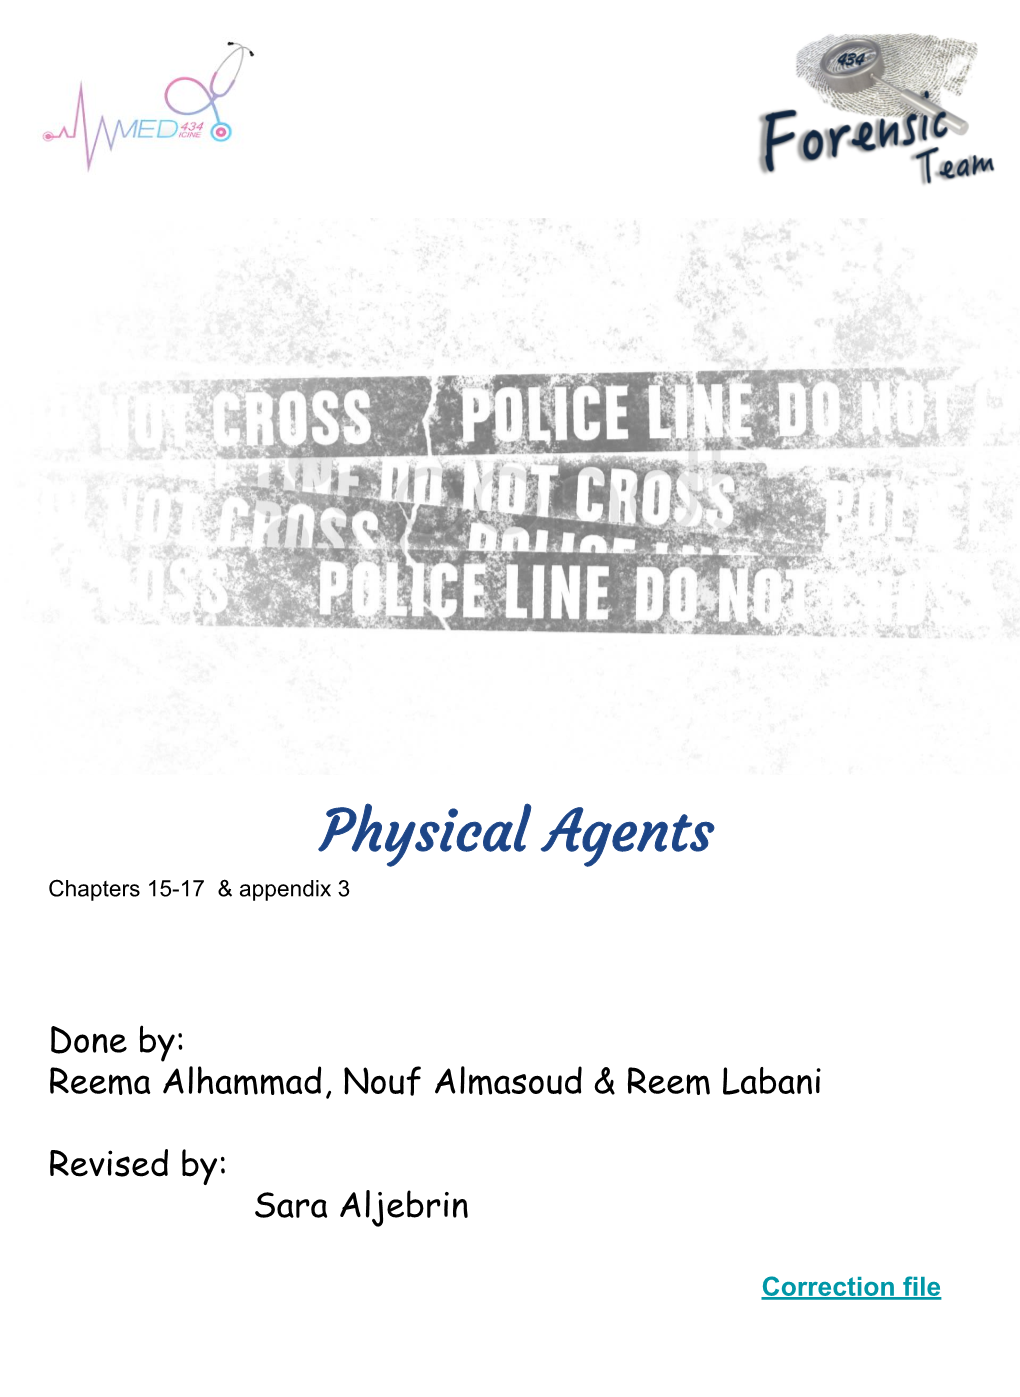 Physical Agents Chapters 15-17 & Appendix 3